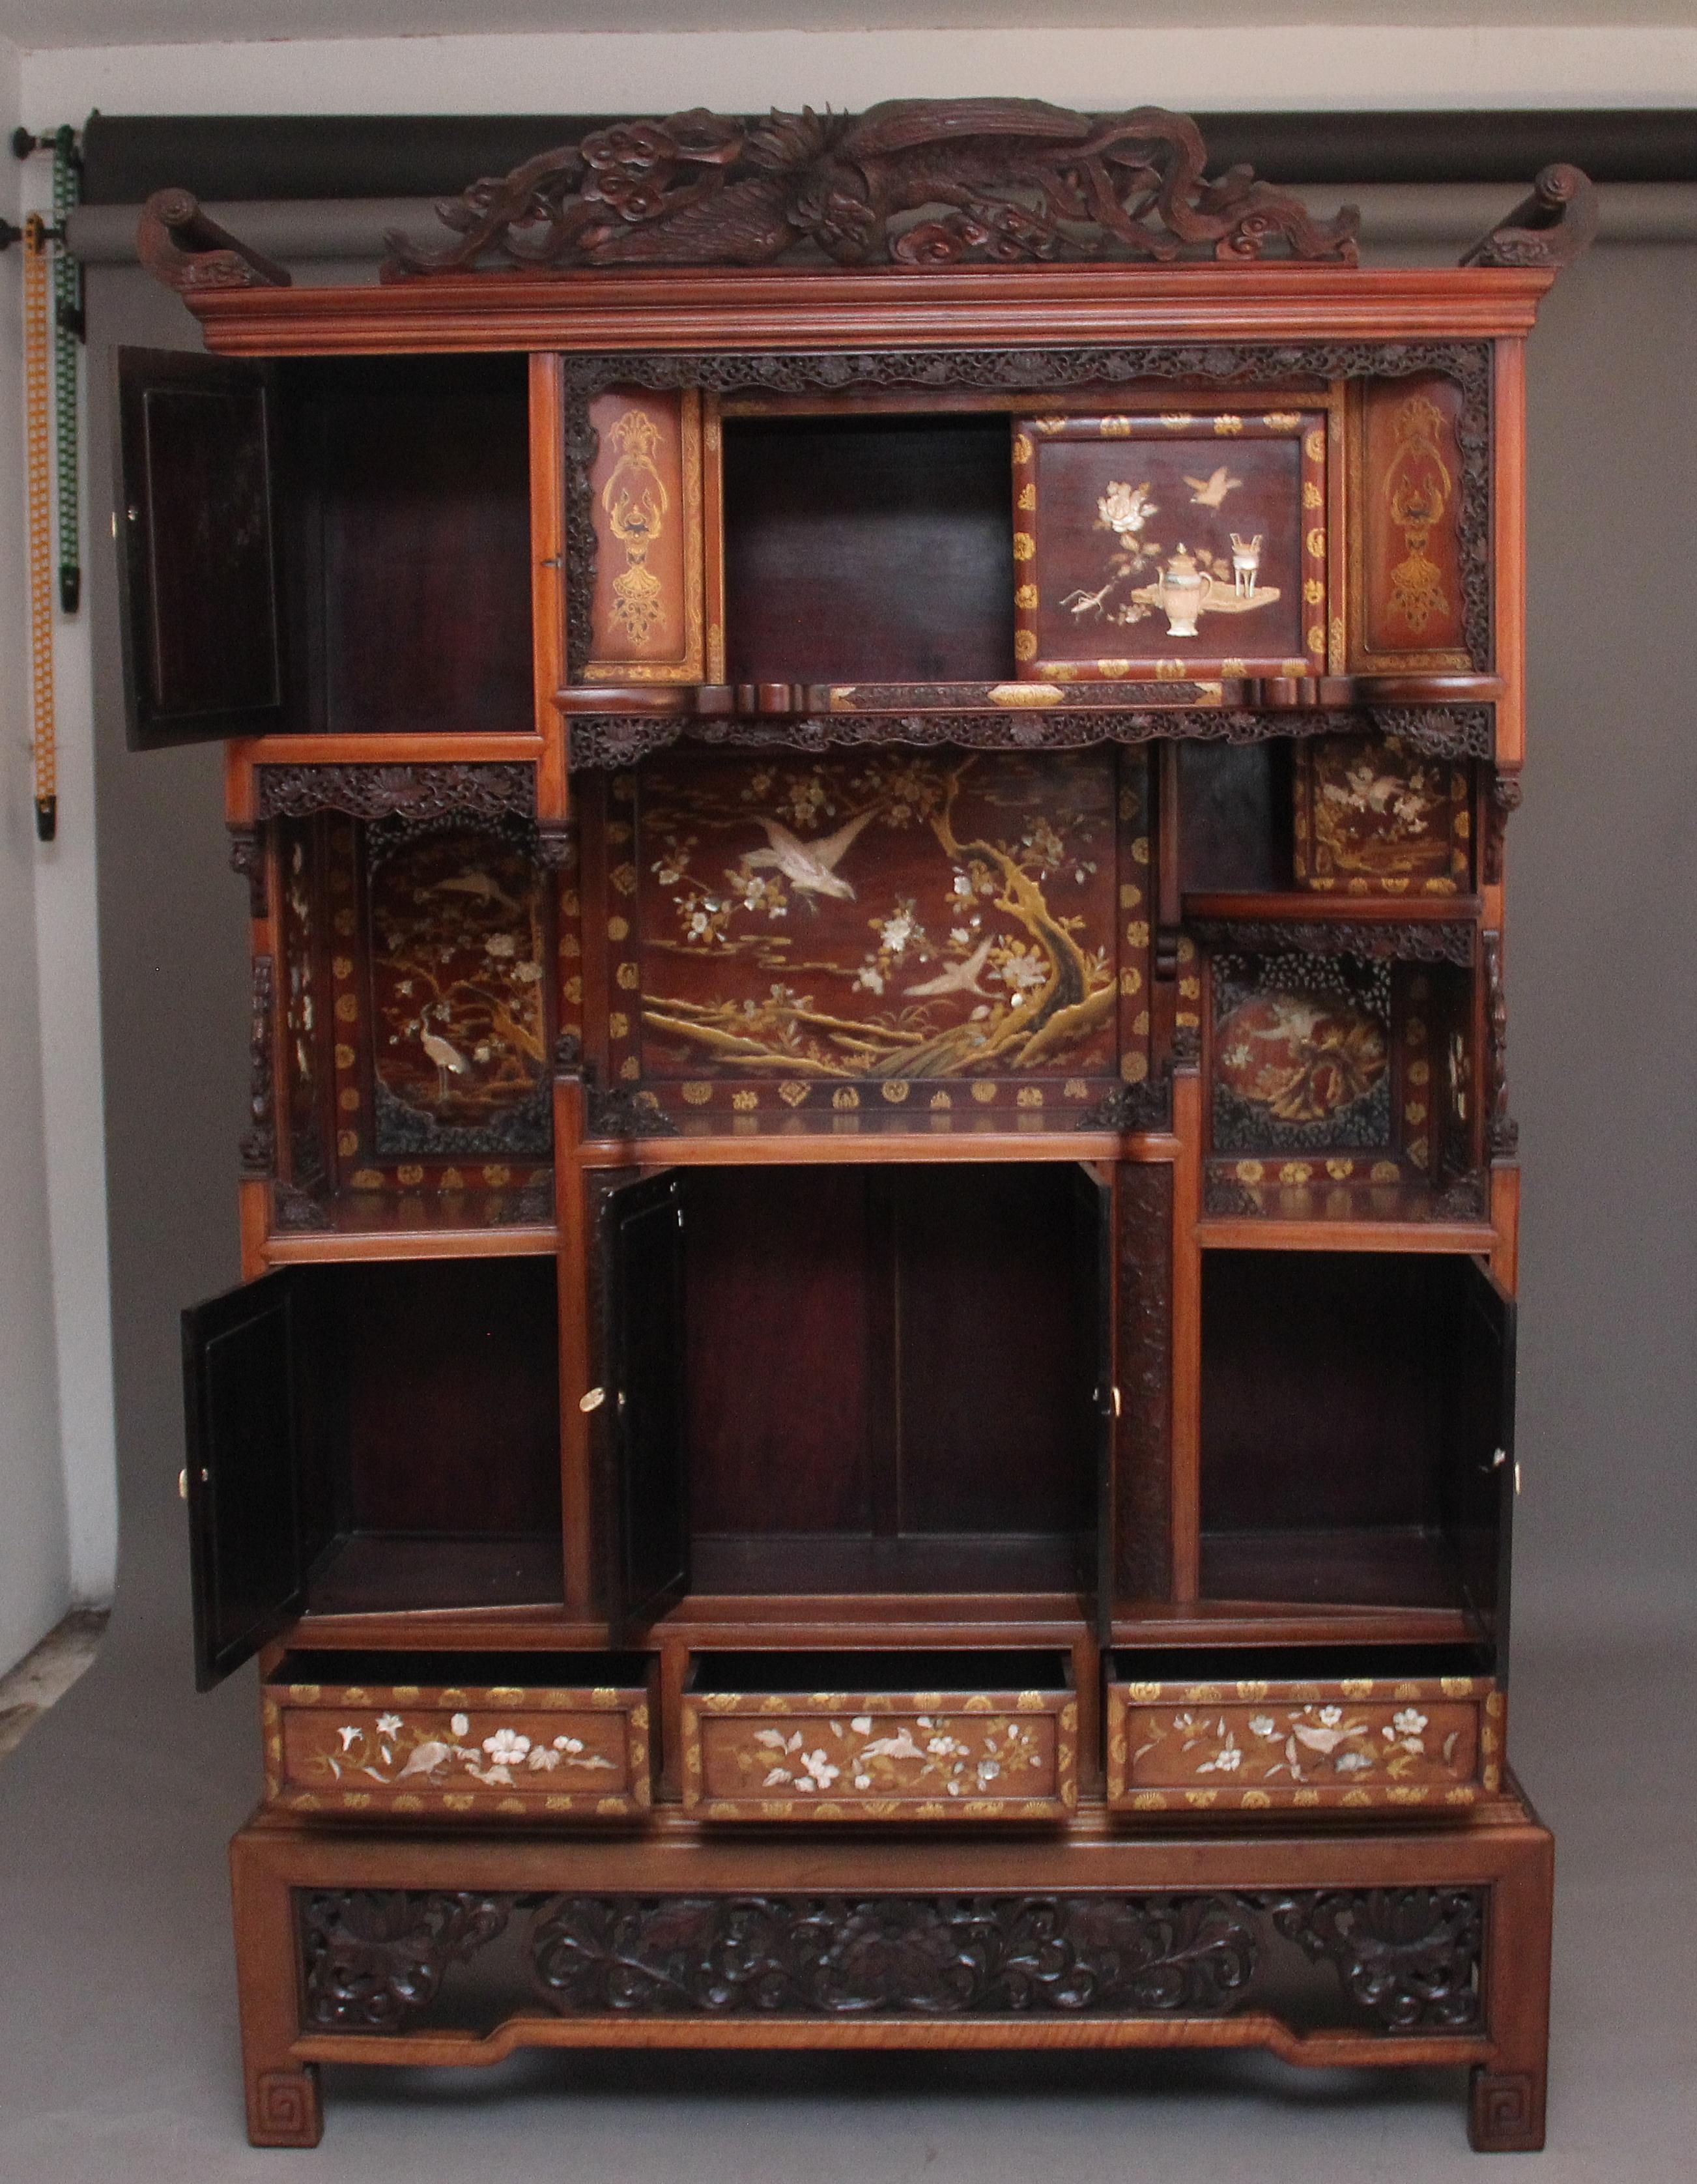 A fabulous quality and impressive large Japanese hardwood Shodona from the Meiji period, the lovely carved pediment incorporating a large winged bird and having decorative C scrolls either side, the cabinet consisting of various shelves, panels,